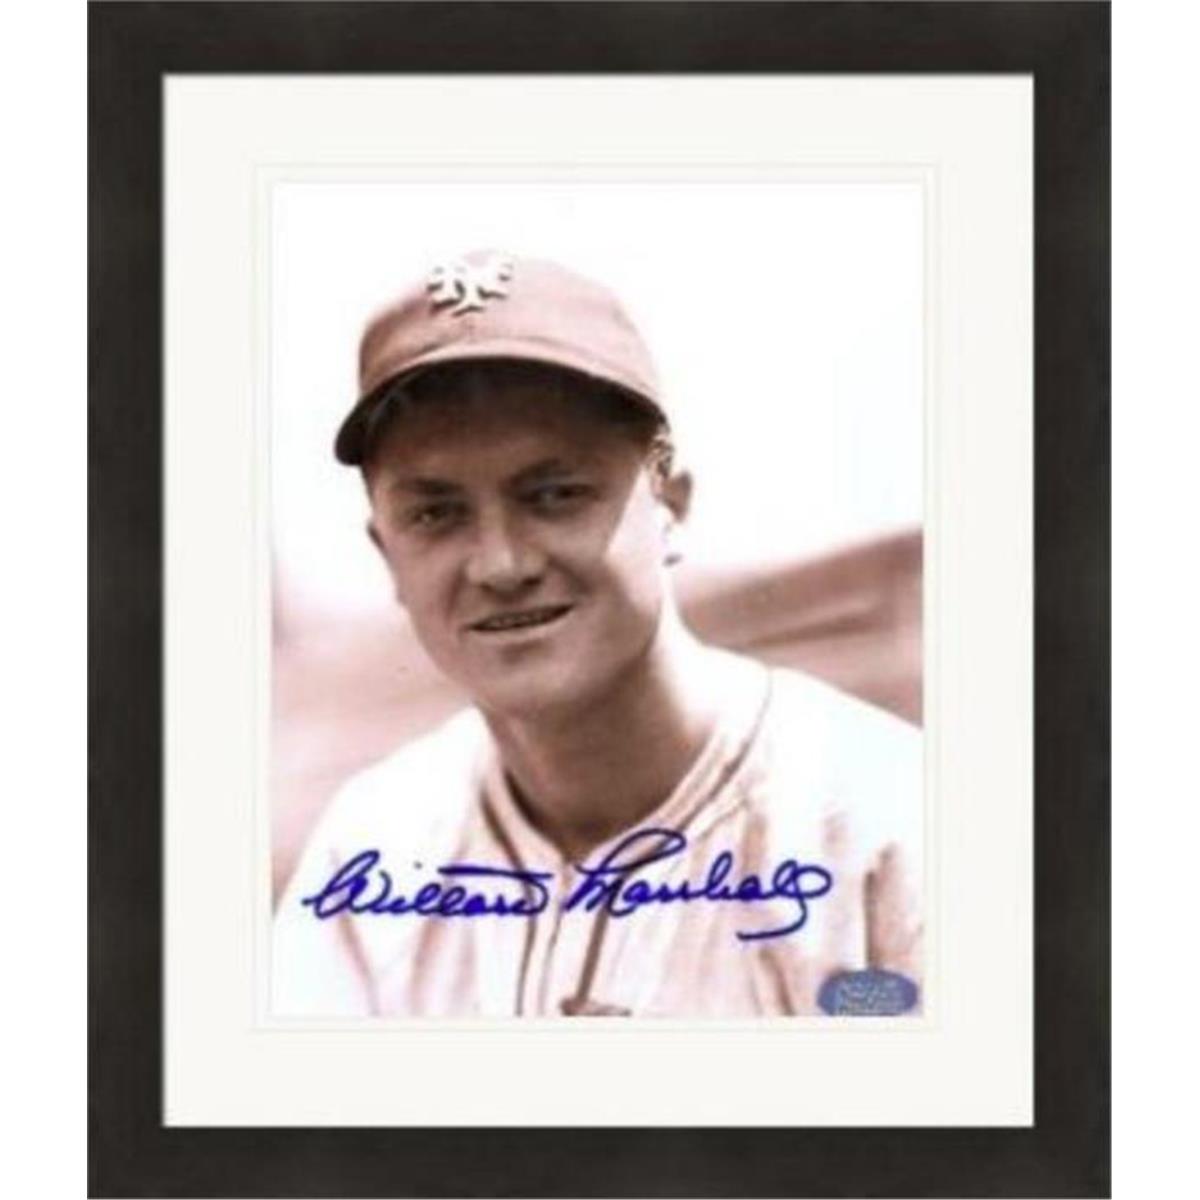 Picture of Autograph Warehouse 409375 8 x 10 in. Willard Marshall Autographed Photo - 2 Matted & Framed